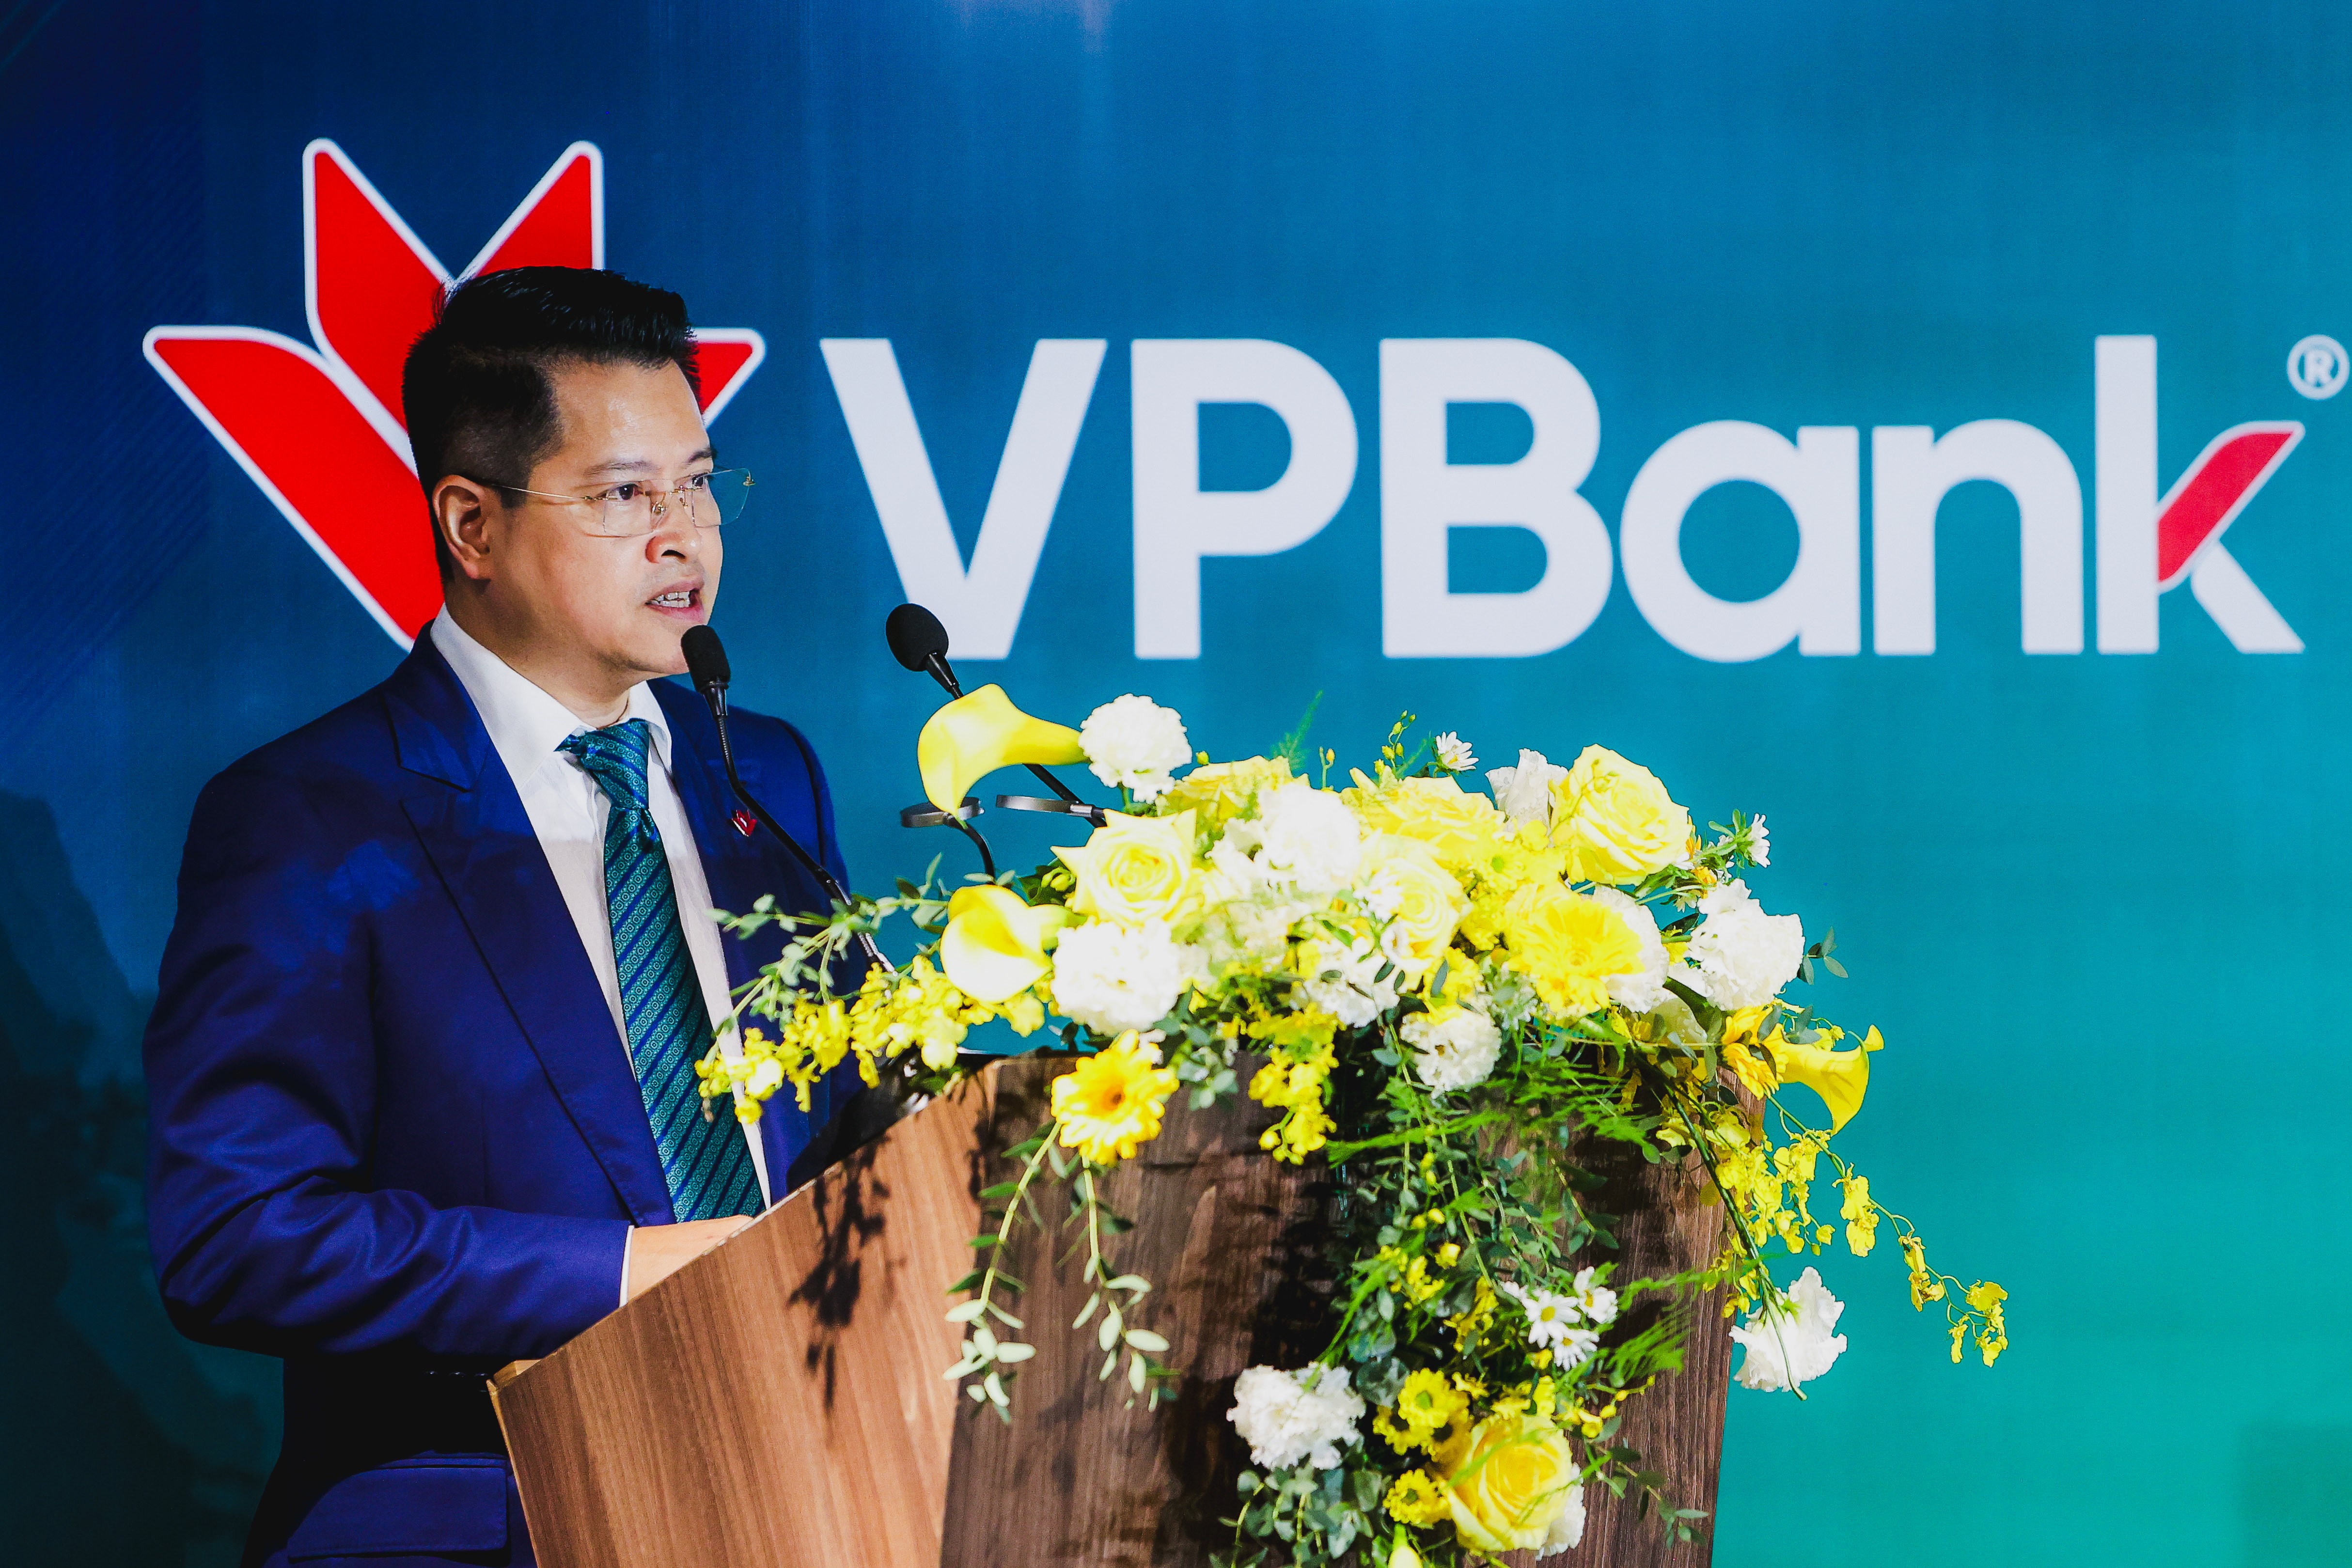 VPBank completes sale of 15% equity stake through private placement to strategic investor SMBC